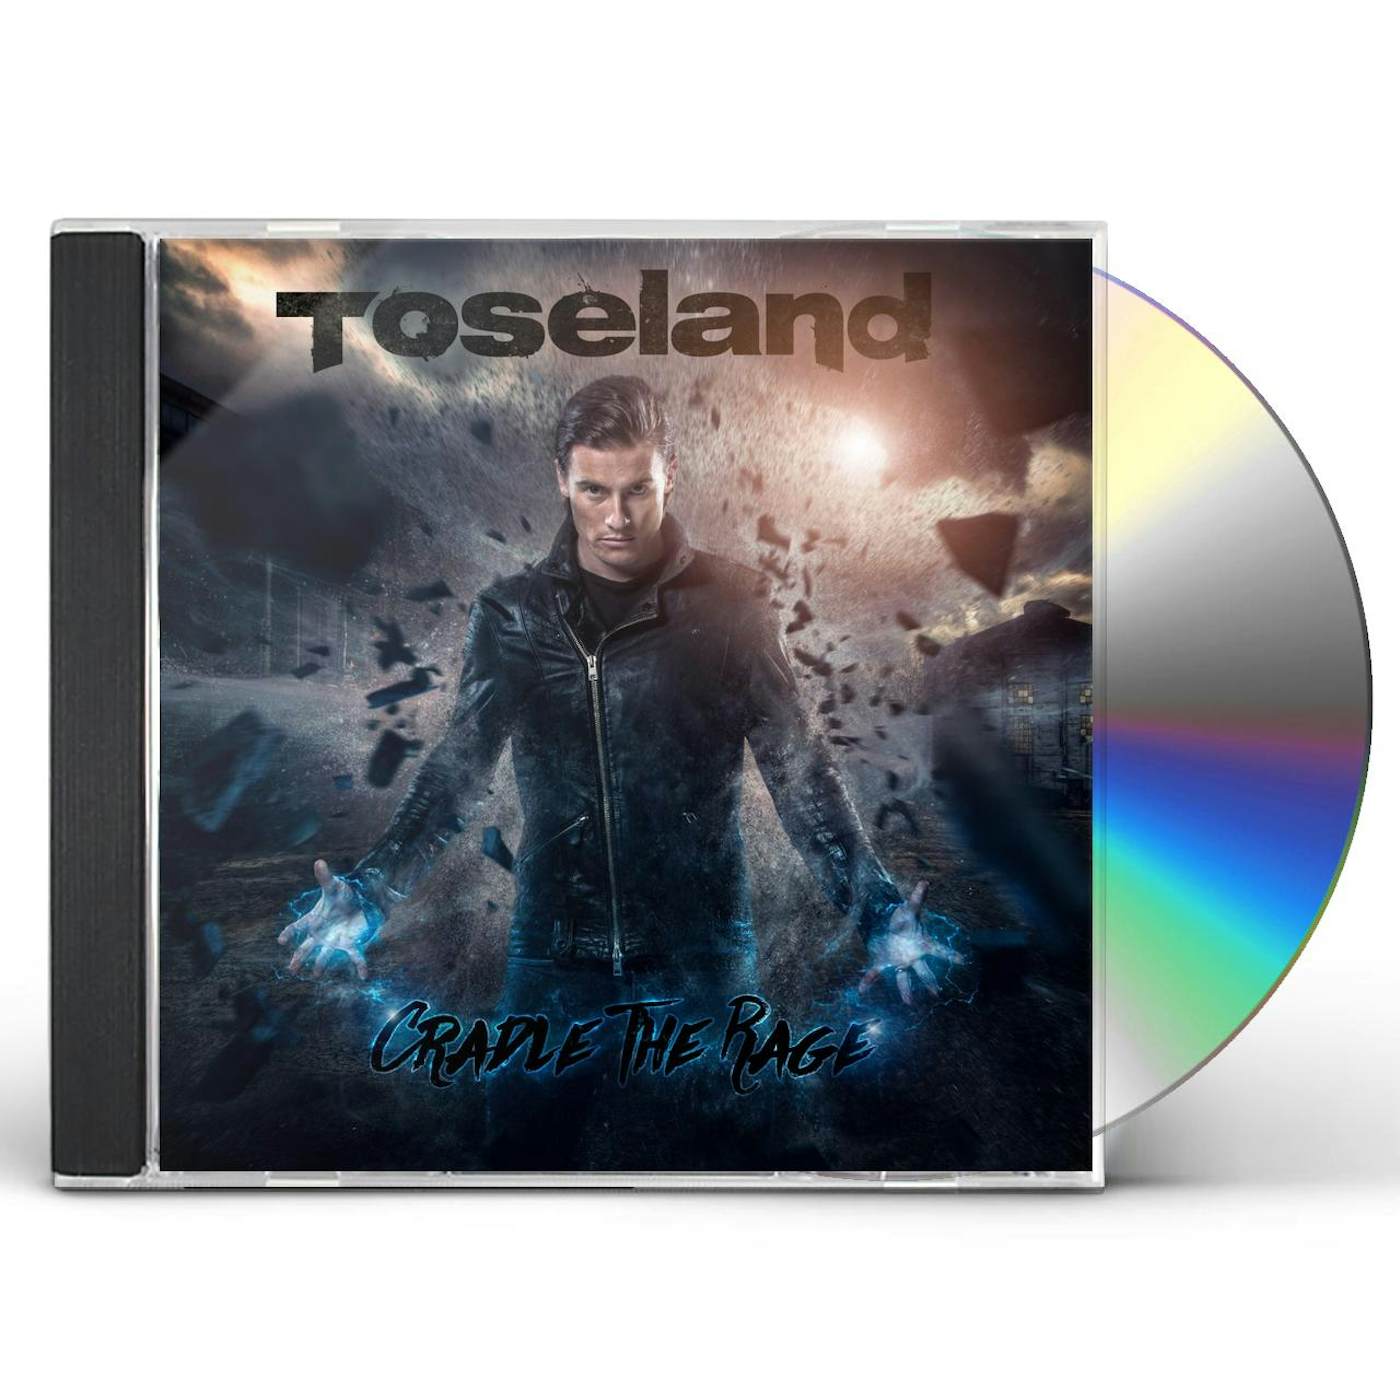 Toseland CRADLE THE RAGE CD